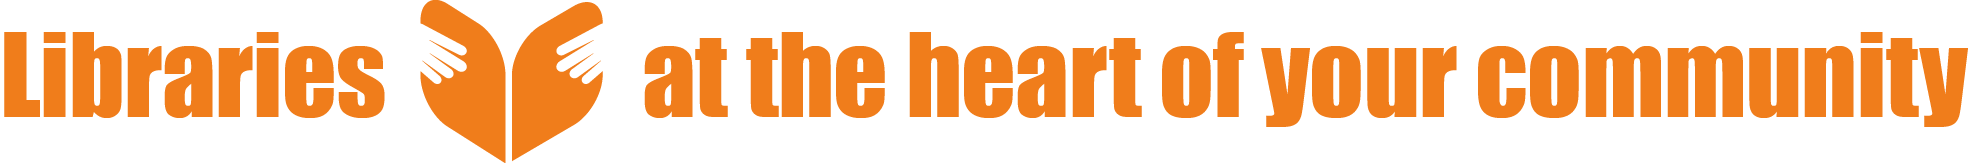 LIBRARIES AT THE HEART LOGO ORANGE.png